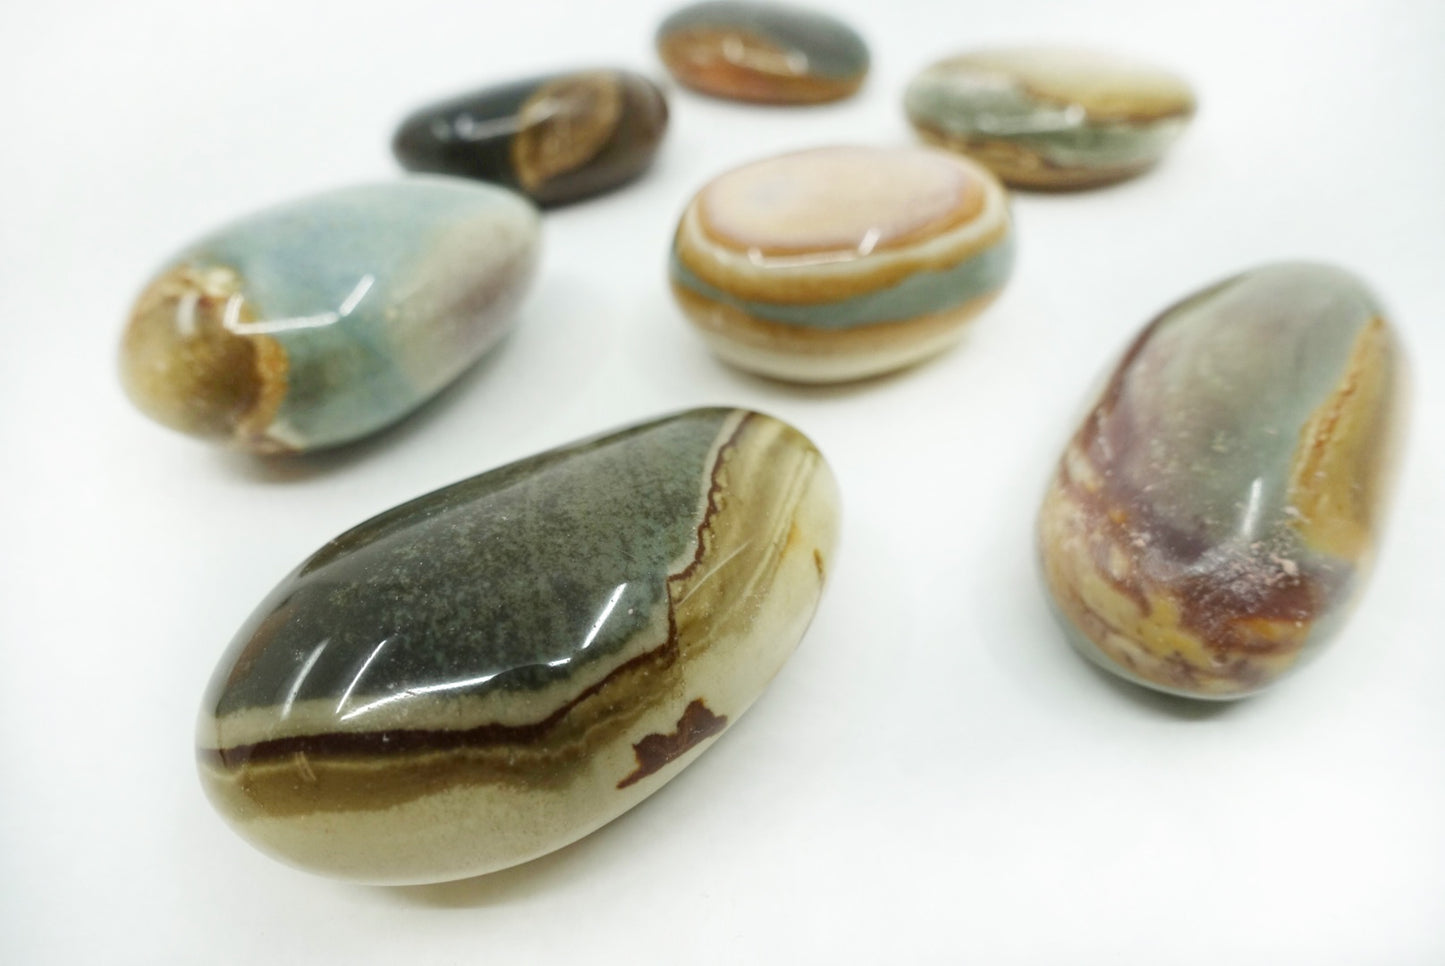 Polychrome Palmstones - Contentment and Vitality.